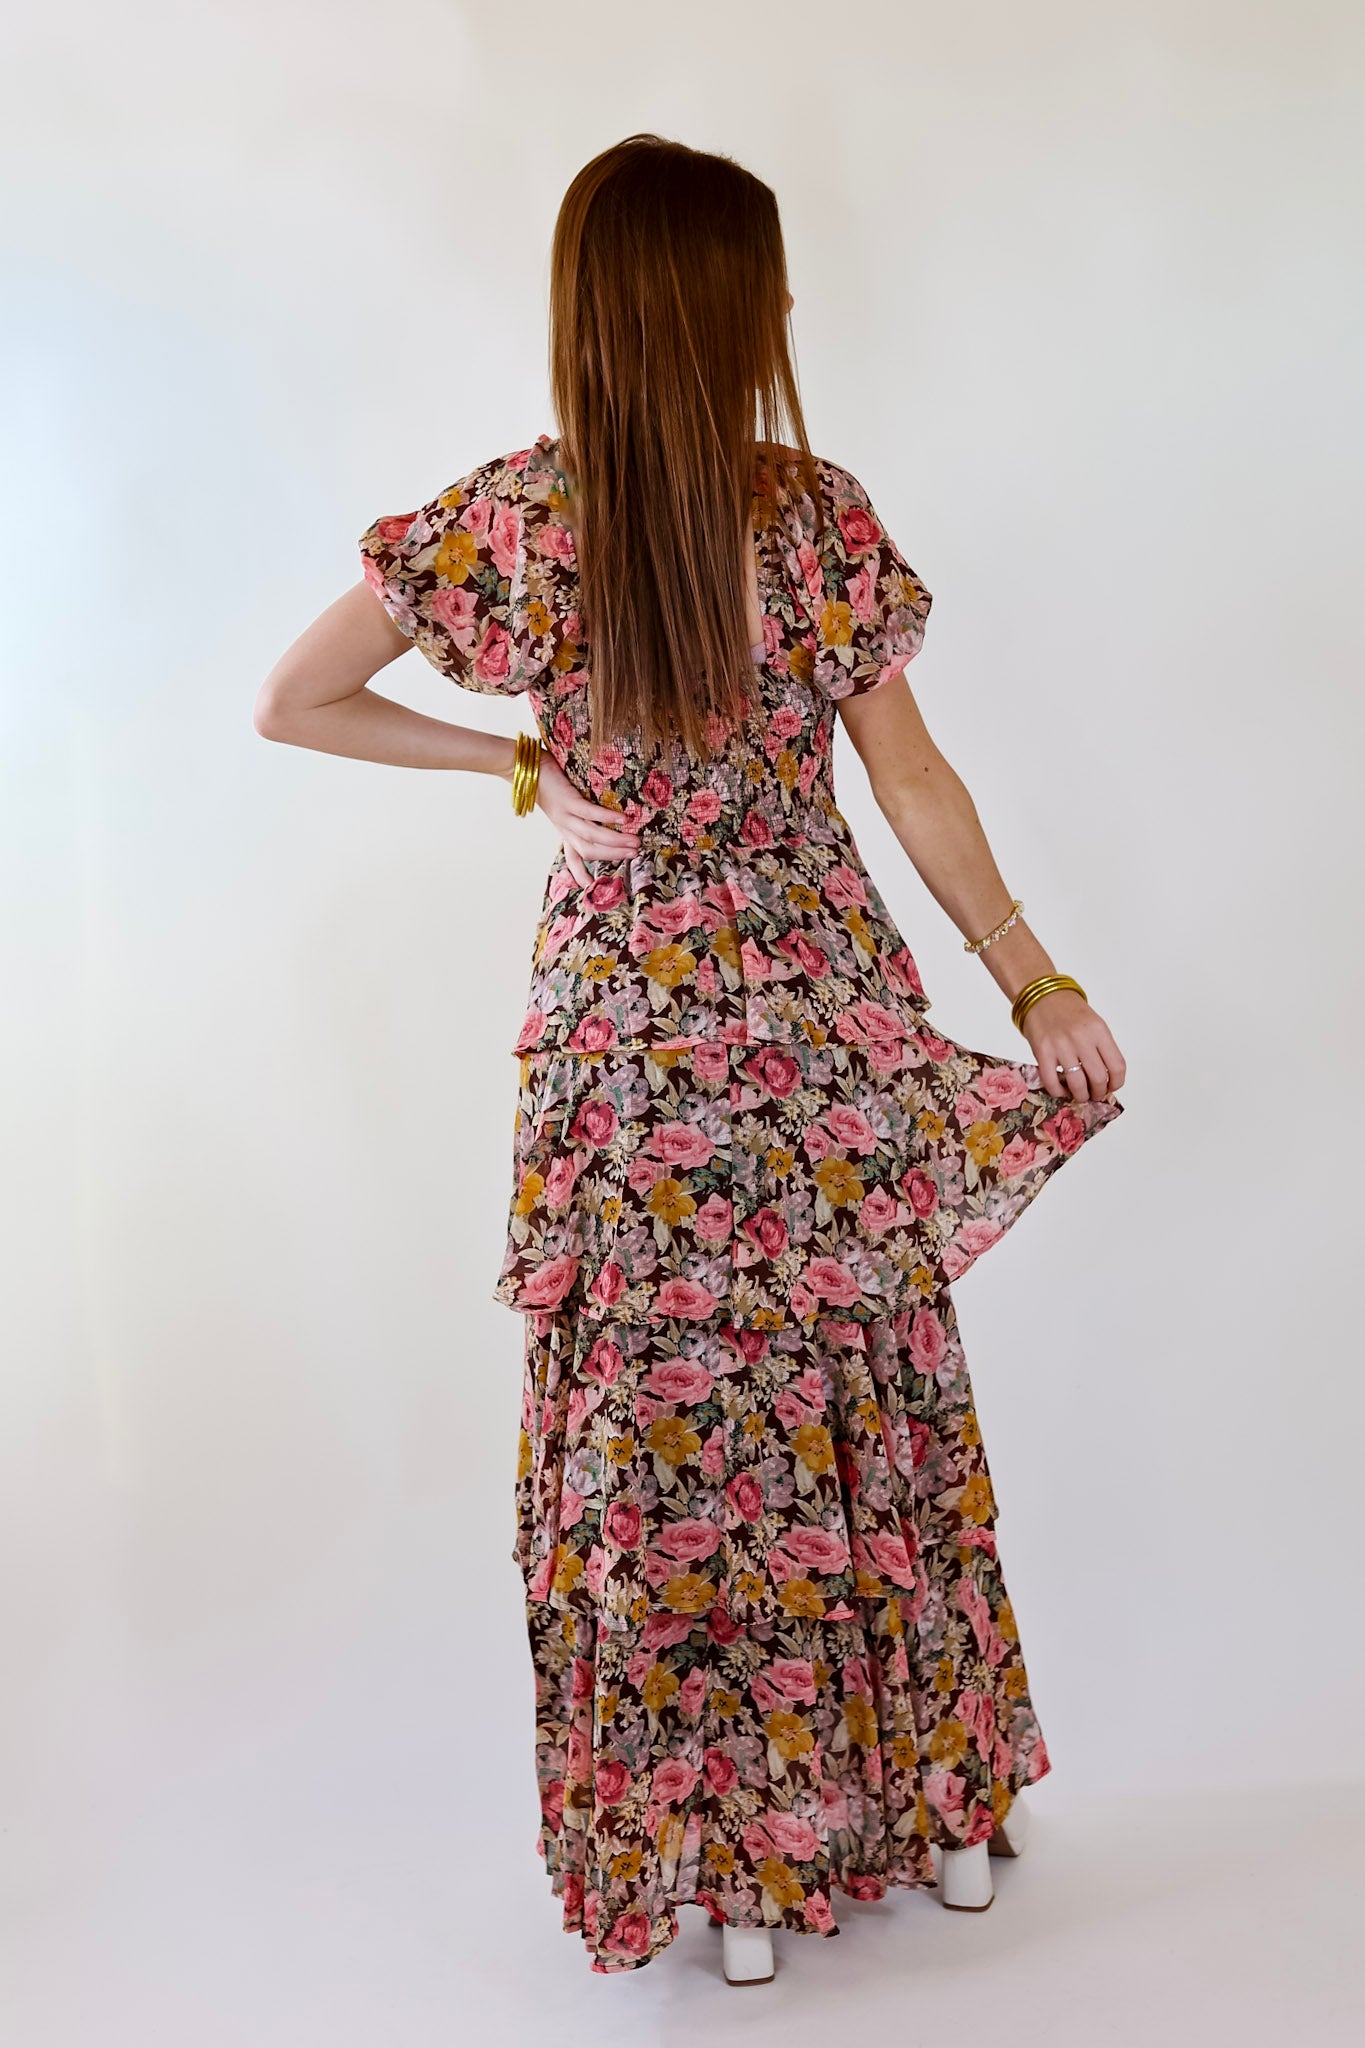 Fun Feeling Floral Tiered Maxi Dress with Smocked Balloon Sleeves in Brown Mix - Giddy Up Glamour Boutique